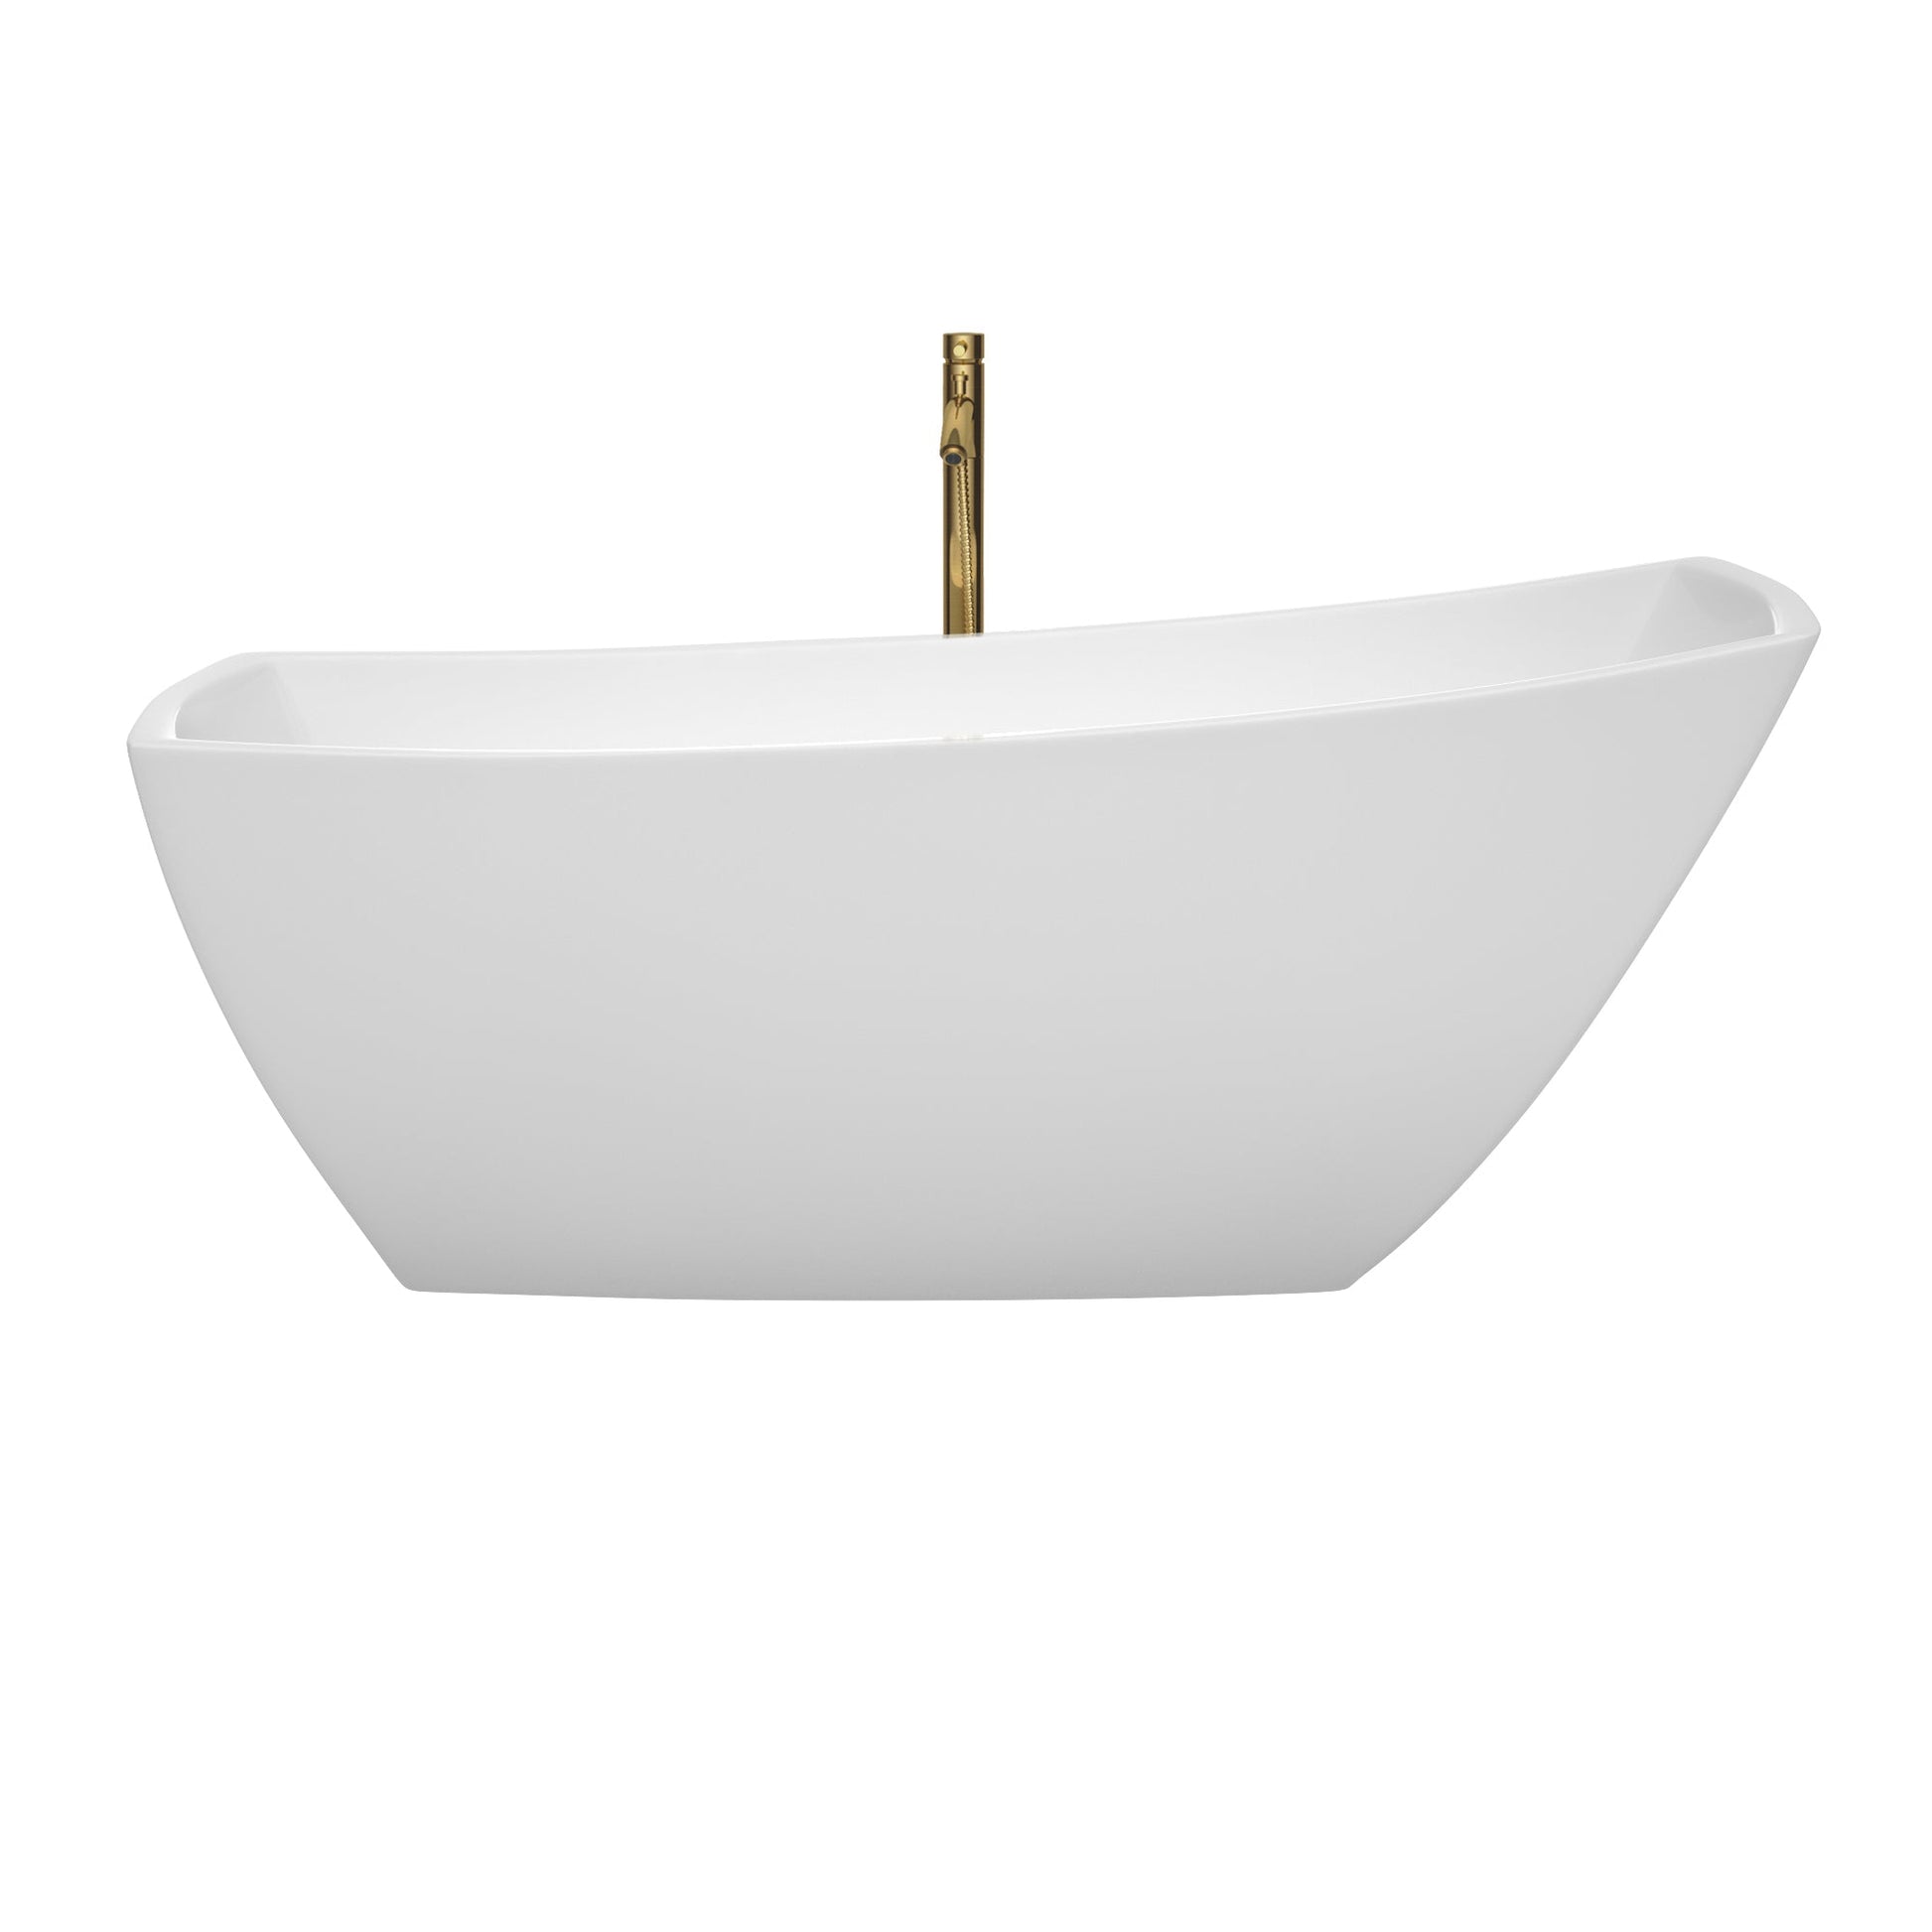 Wyndham Collection Antigua 67" Freestanding Bathtub in White With Polished Chrome Trim and Floor Mounted Faucet in Brushed Gold